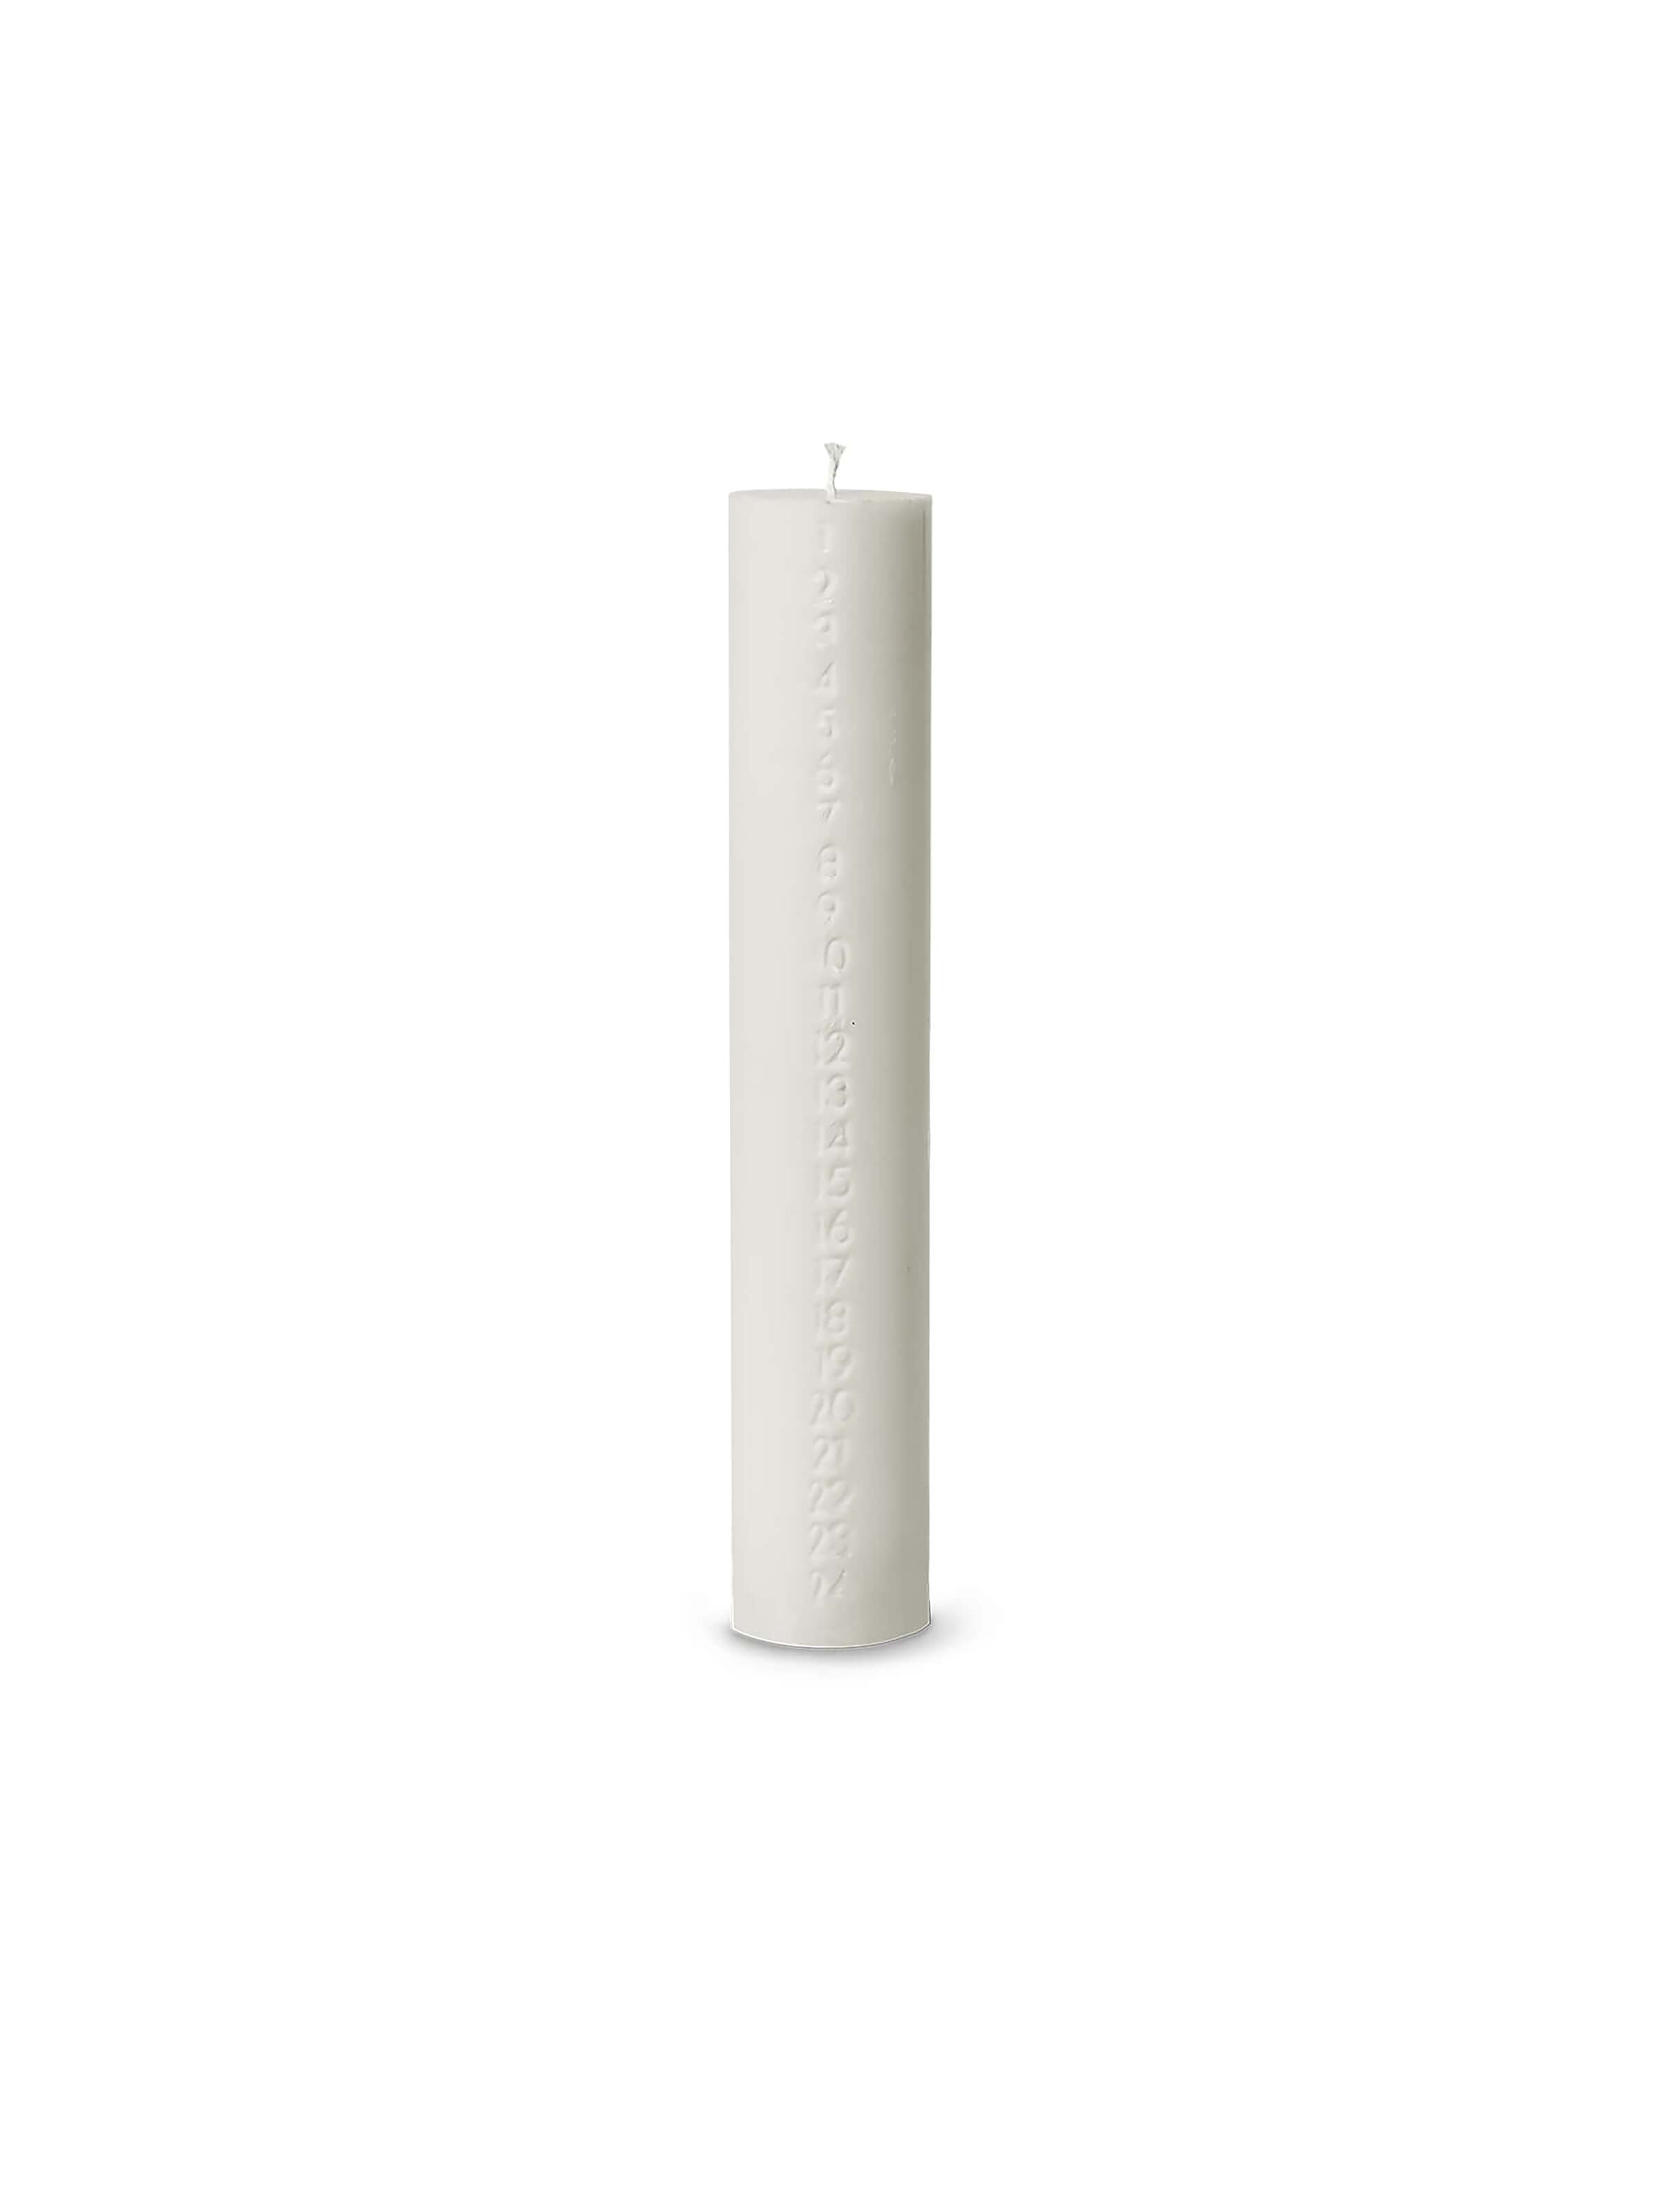 Pure Advent Candle | Snow White | by ferm Living - Lifestory - ferm LIVING